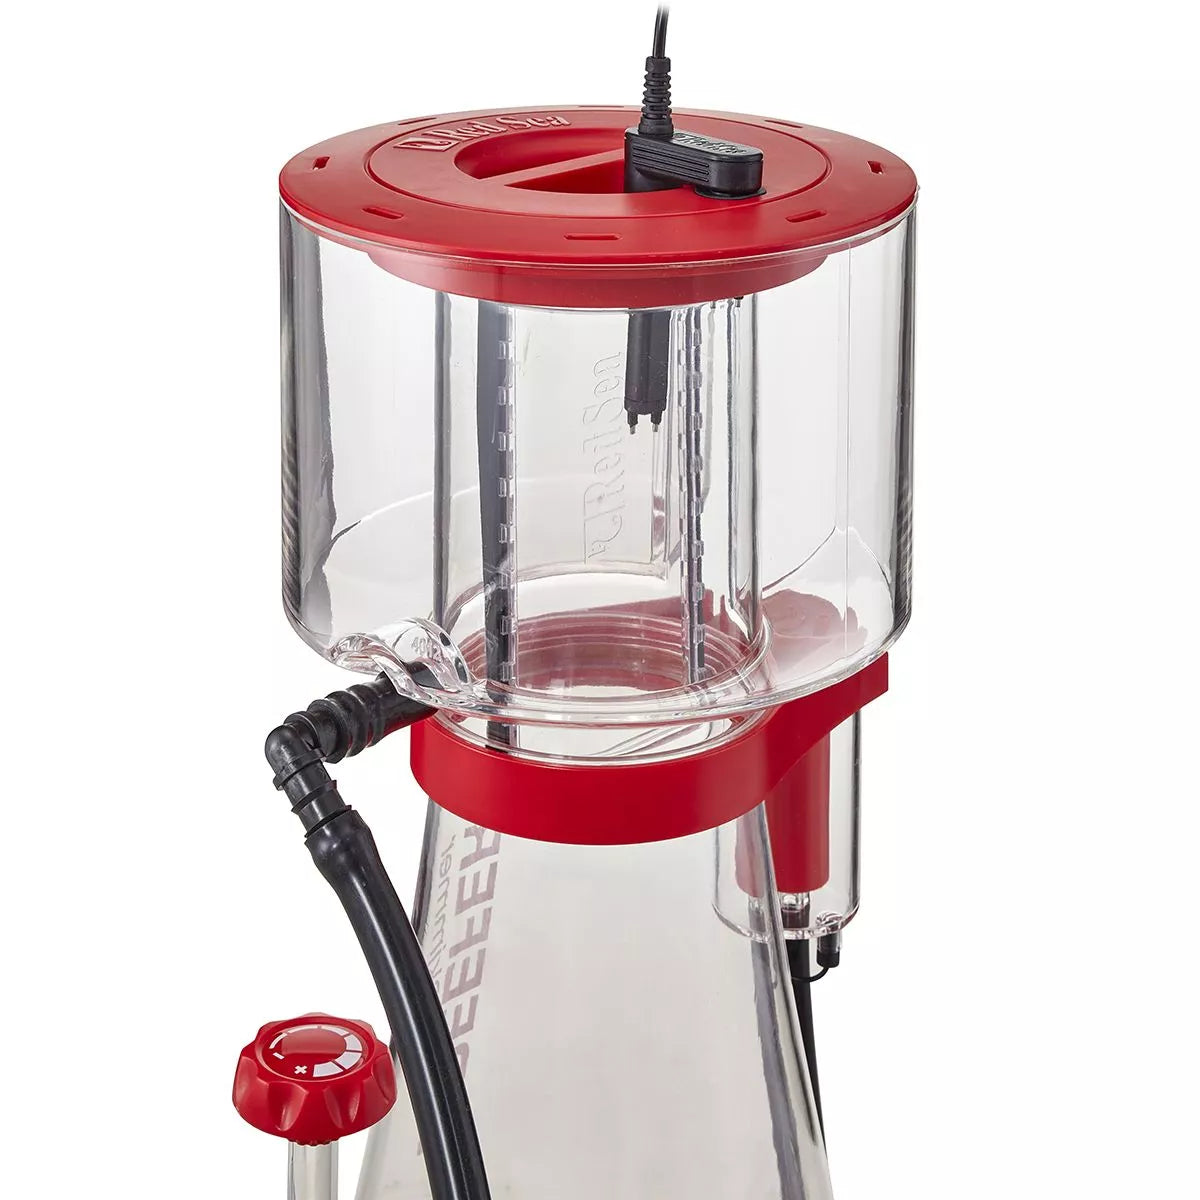 Reefer DC 300 Protein Skimmer - Red Sea - Red Sea